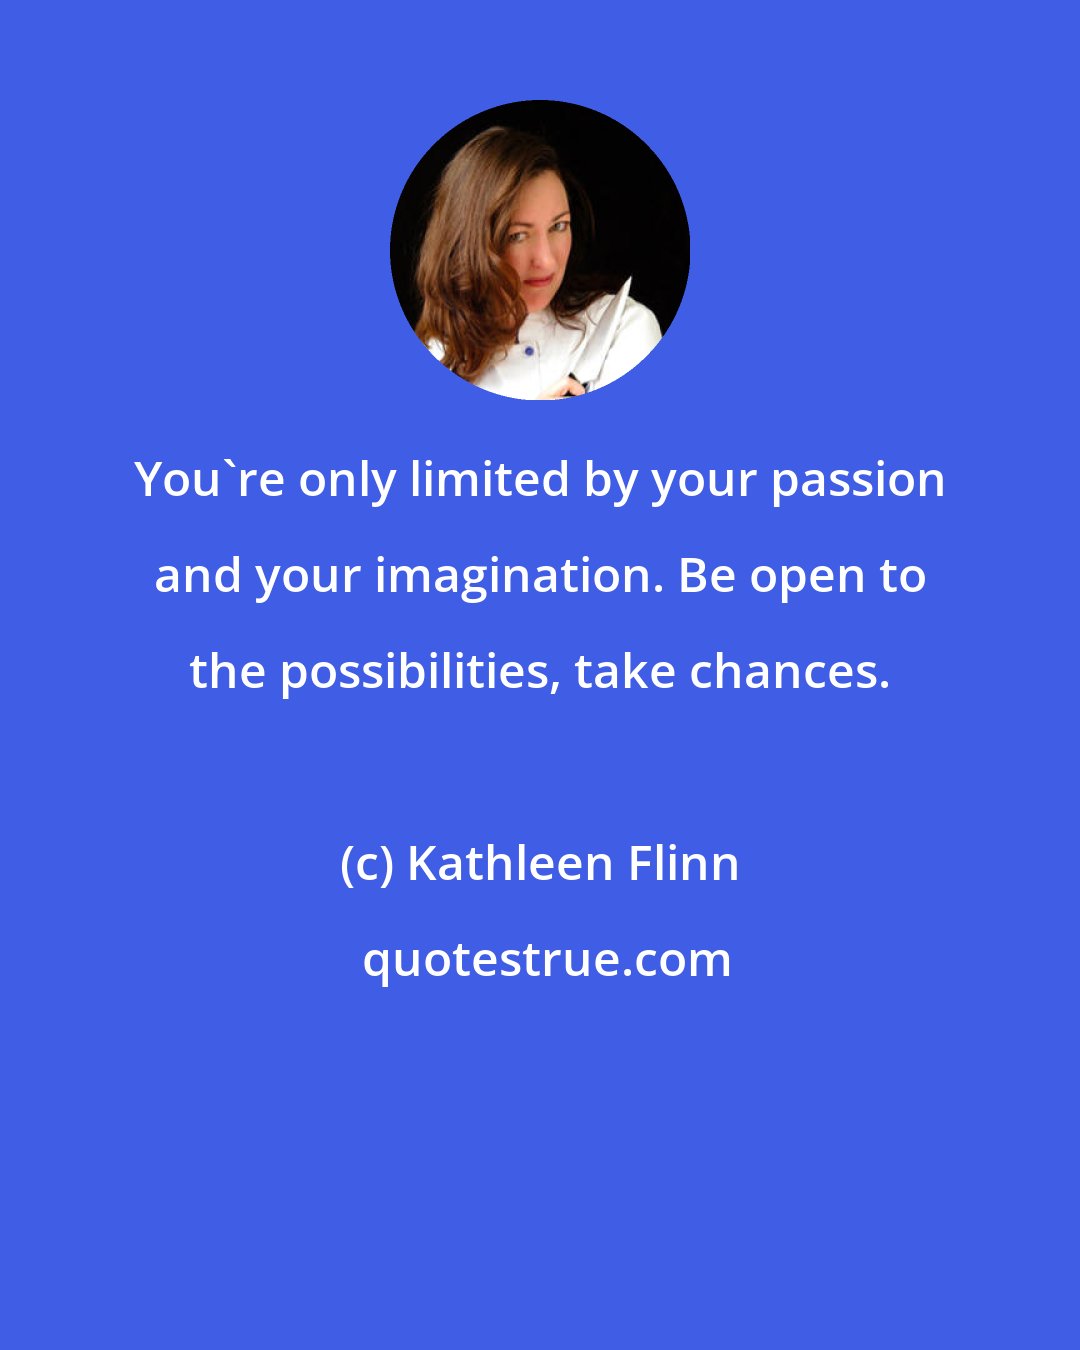 Kathleen Flinn: You're only limited by your passion and your imagination. Be open to the possibilities, take chances.